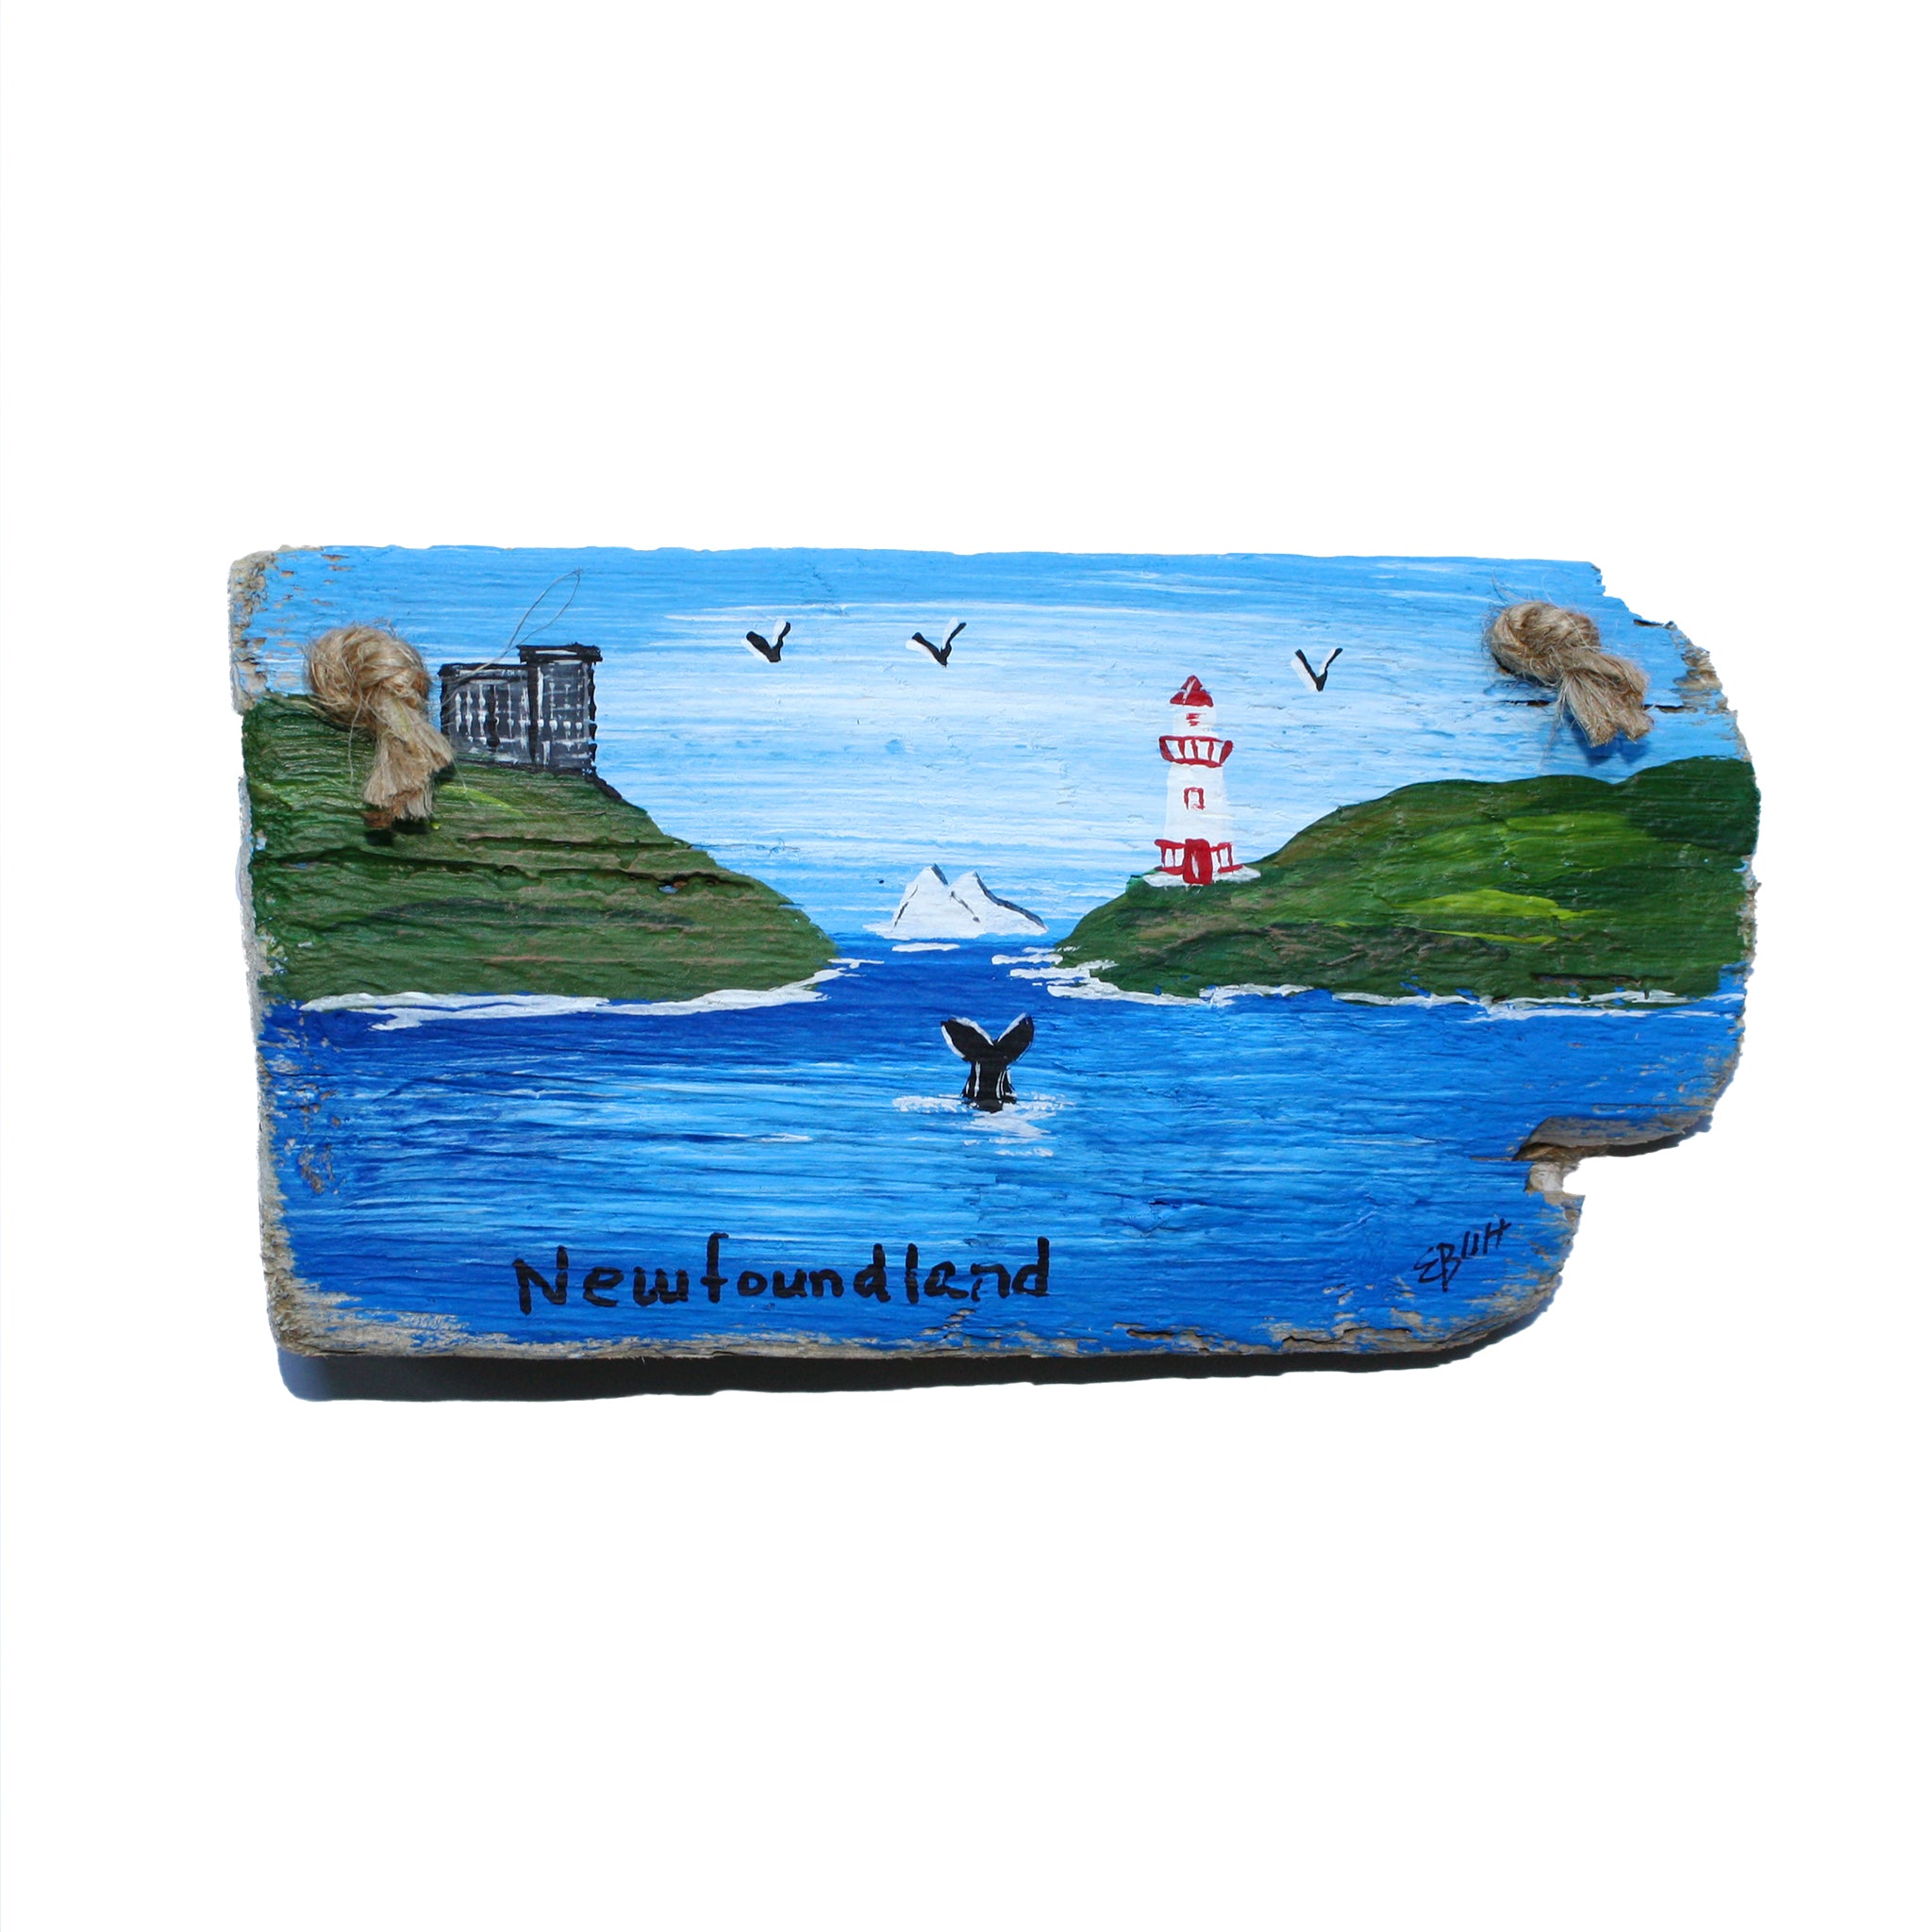 hand painted driftwood souvenir with Newfoundland scene